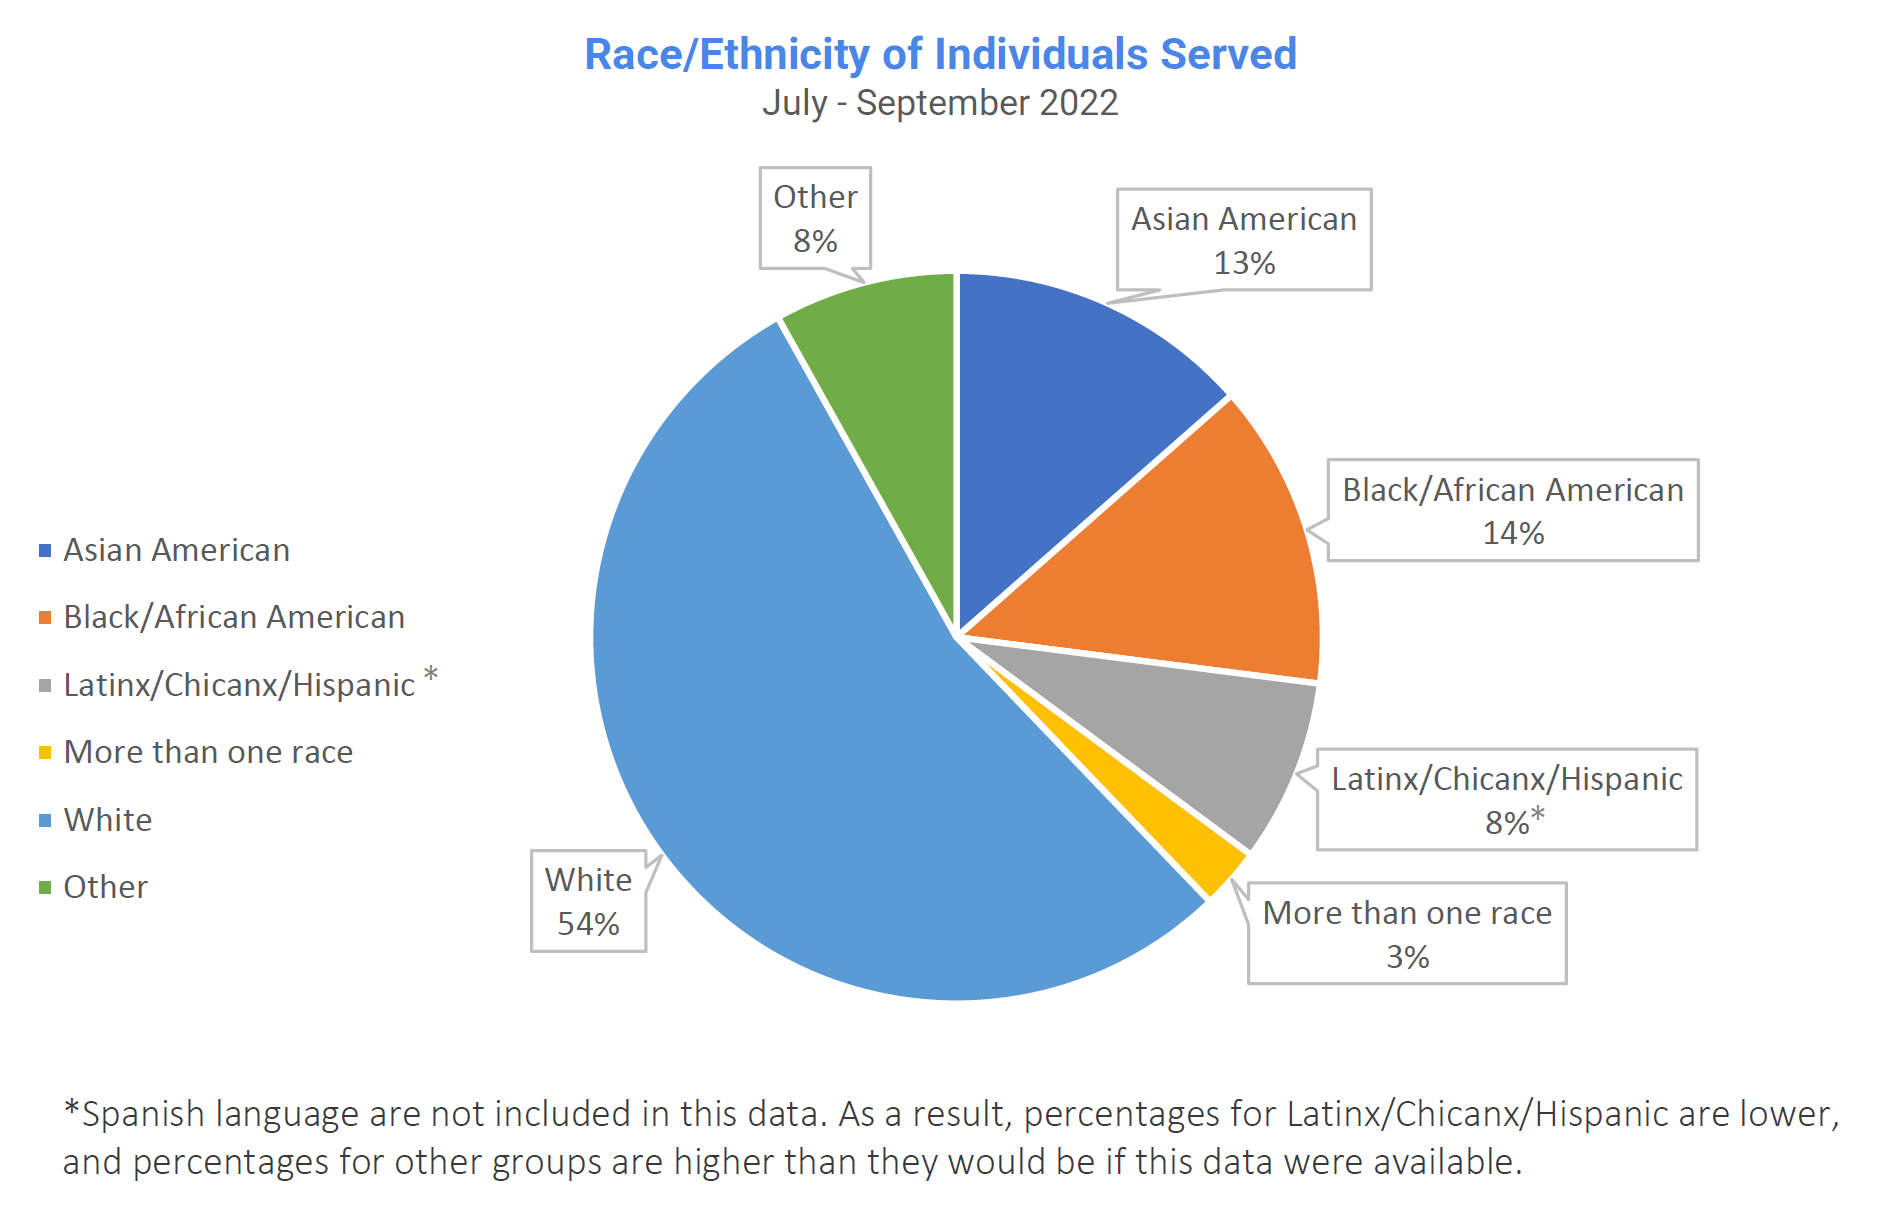 Race/ethnicity of individuals served July to September 2022